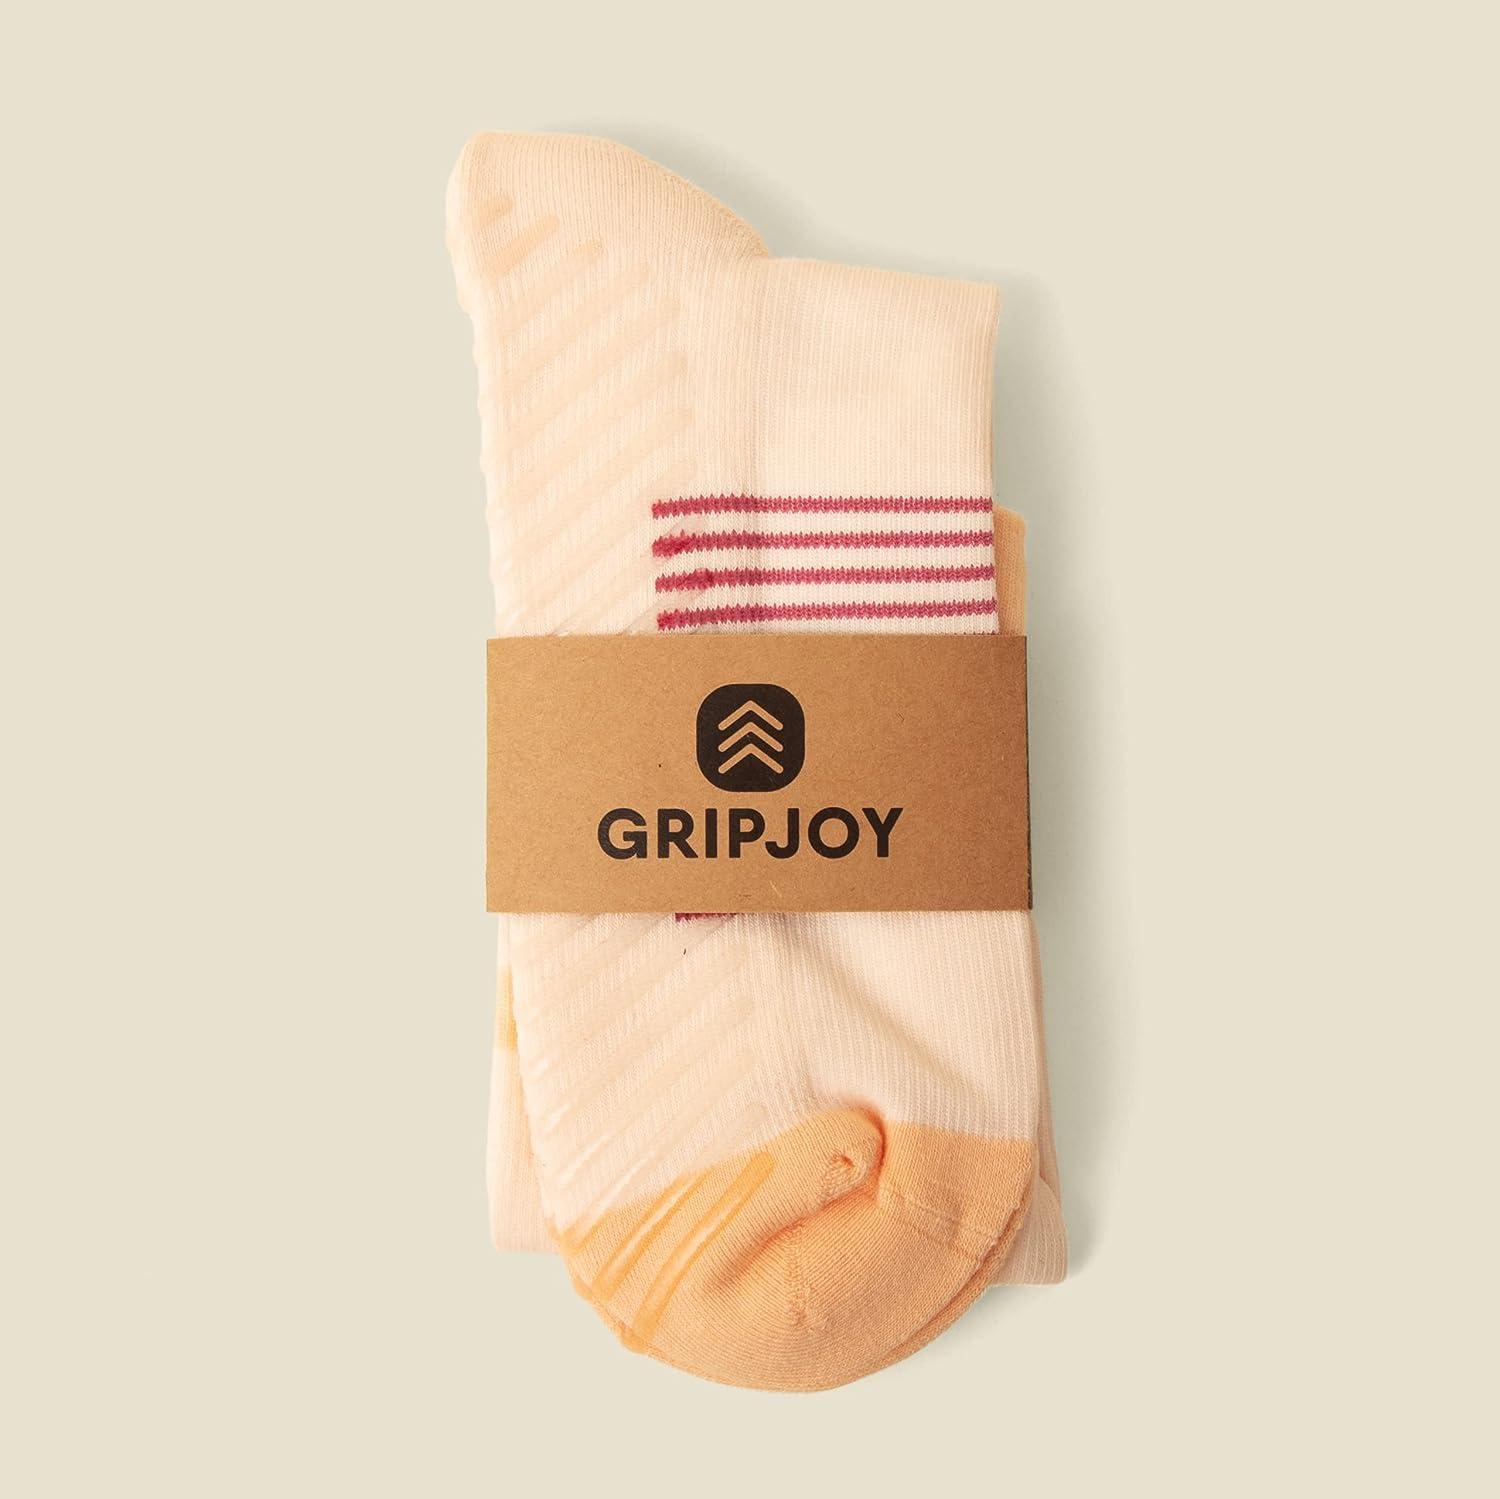  Gripjoy Compression Socks with Grips for Women & Men